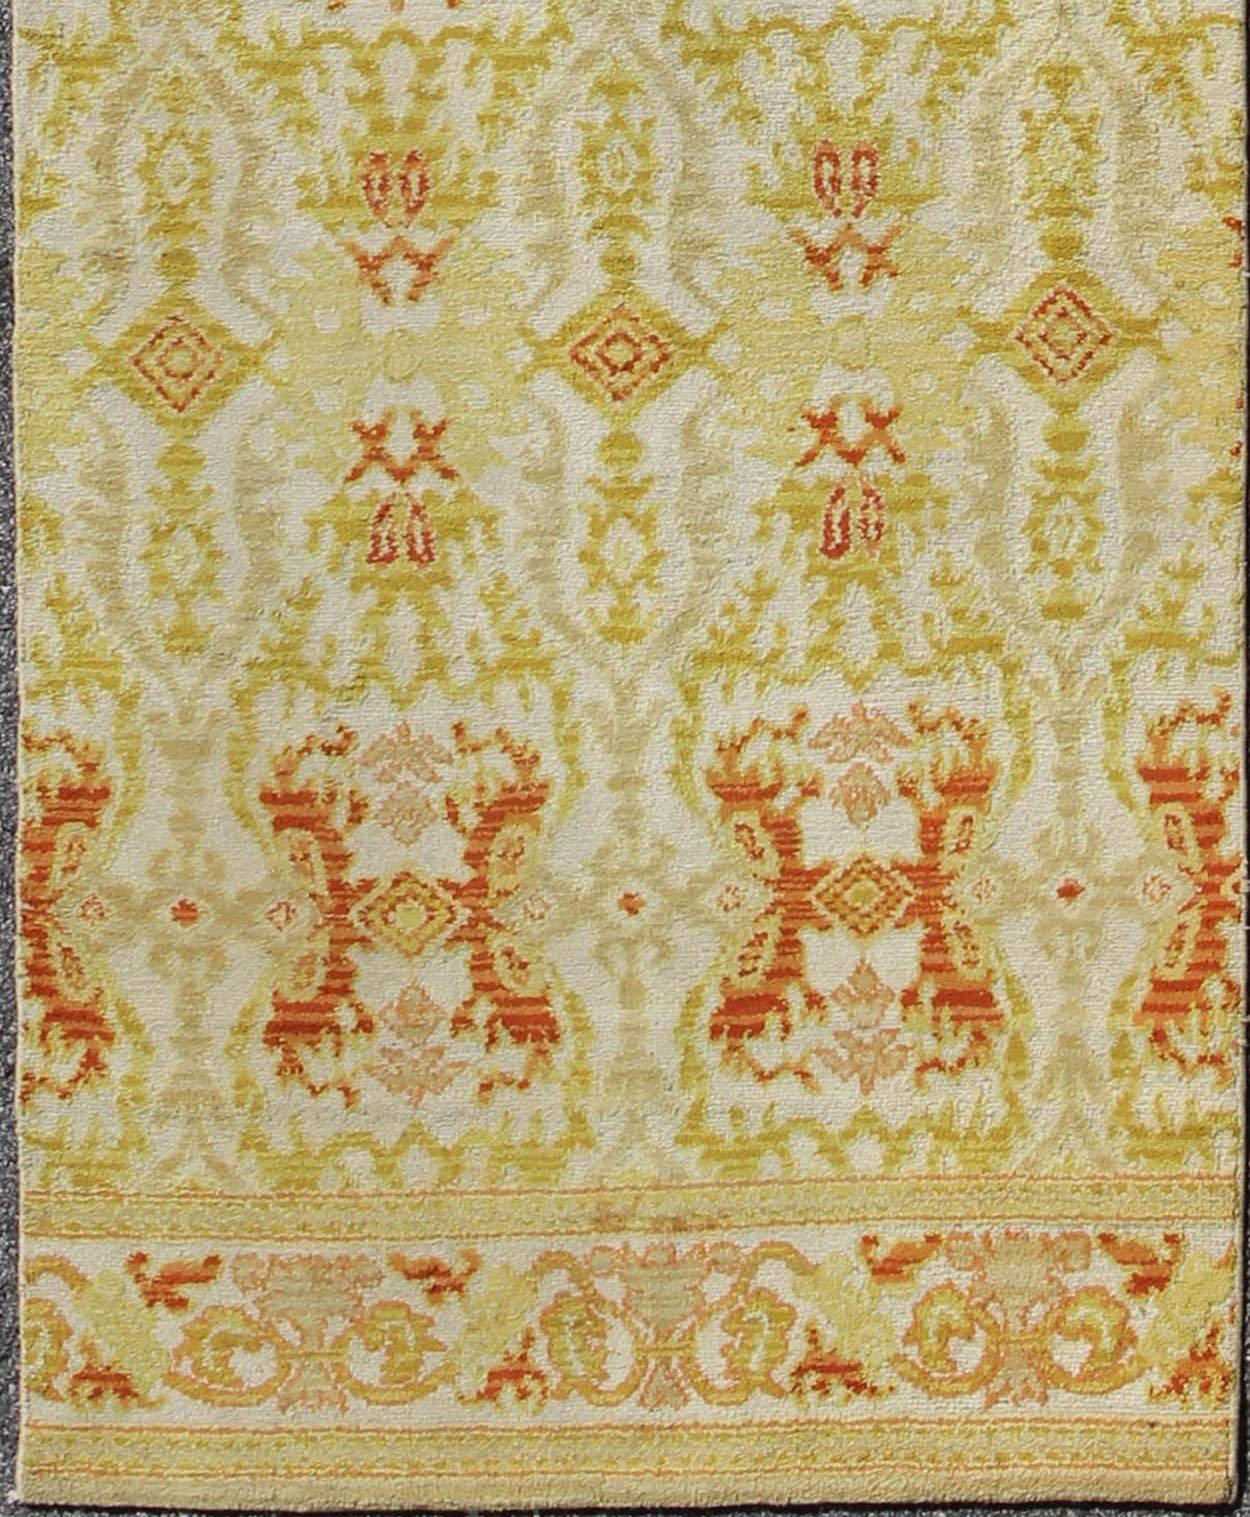 Green, yellow, orange antique Spanish runner feat. in Atlanta homes and lifestyles, rug B-0304-B, country of origin / type: Spain / Spanish, circa 1920

Measures: 3'10 x 14'

This stunning antique Spanish runner fragment bears a lovely repeating